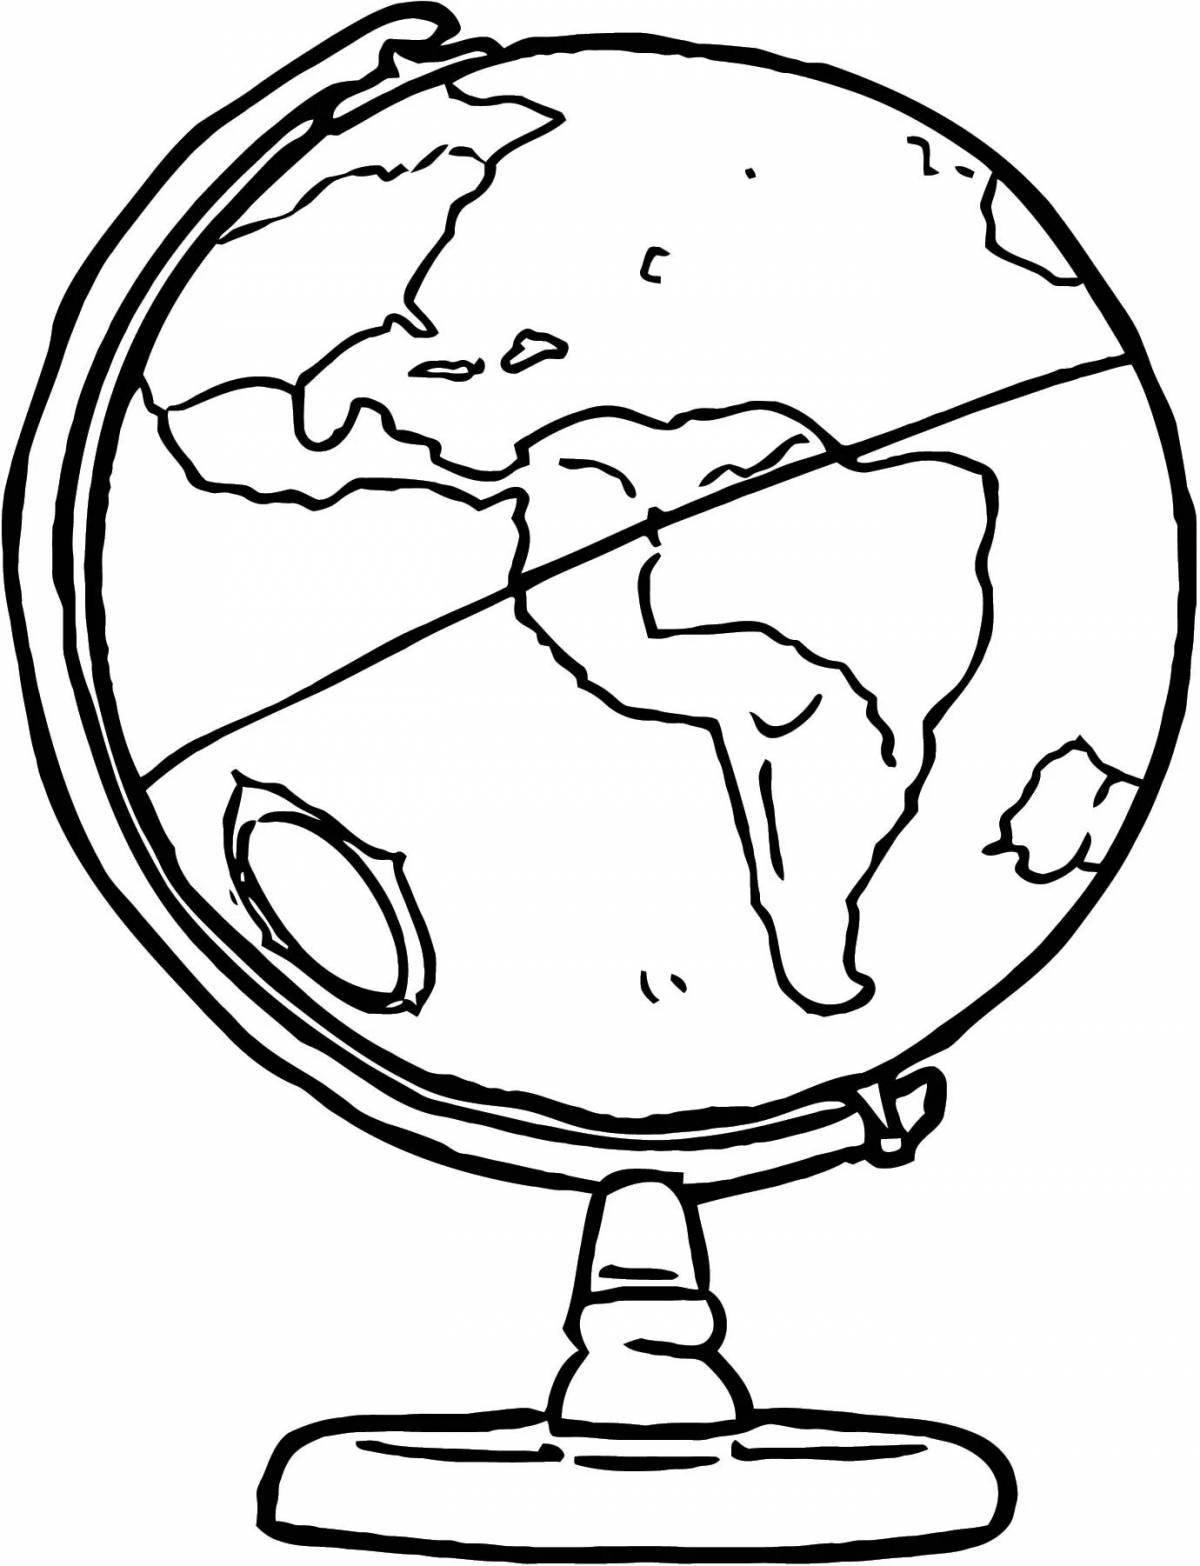 Sophisticated Equator coloring page